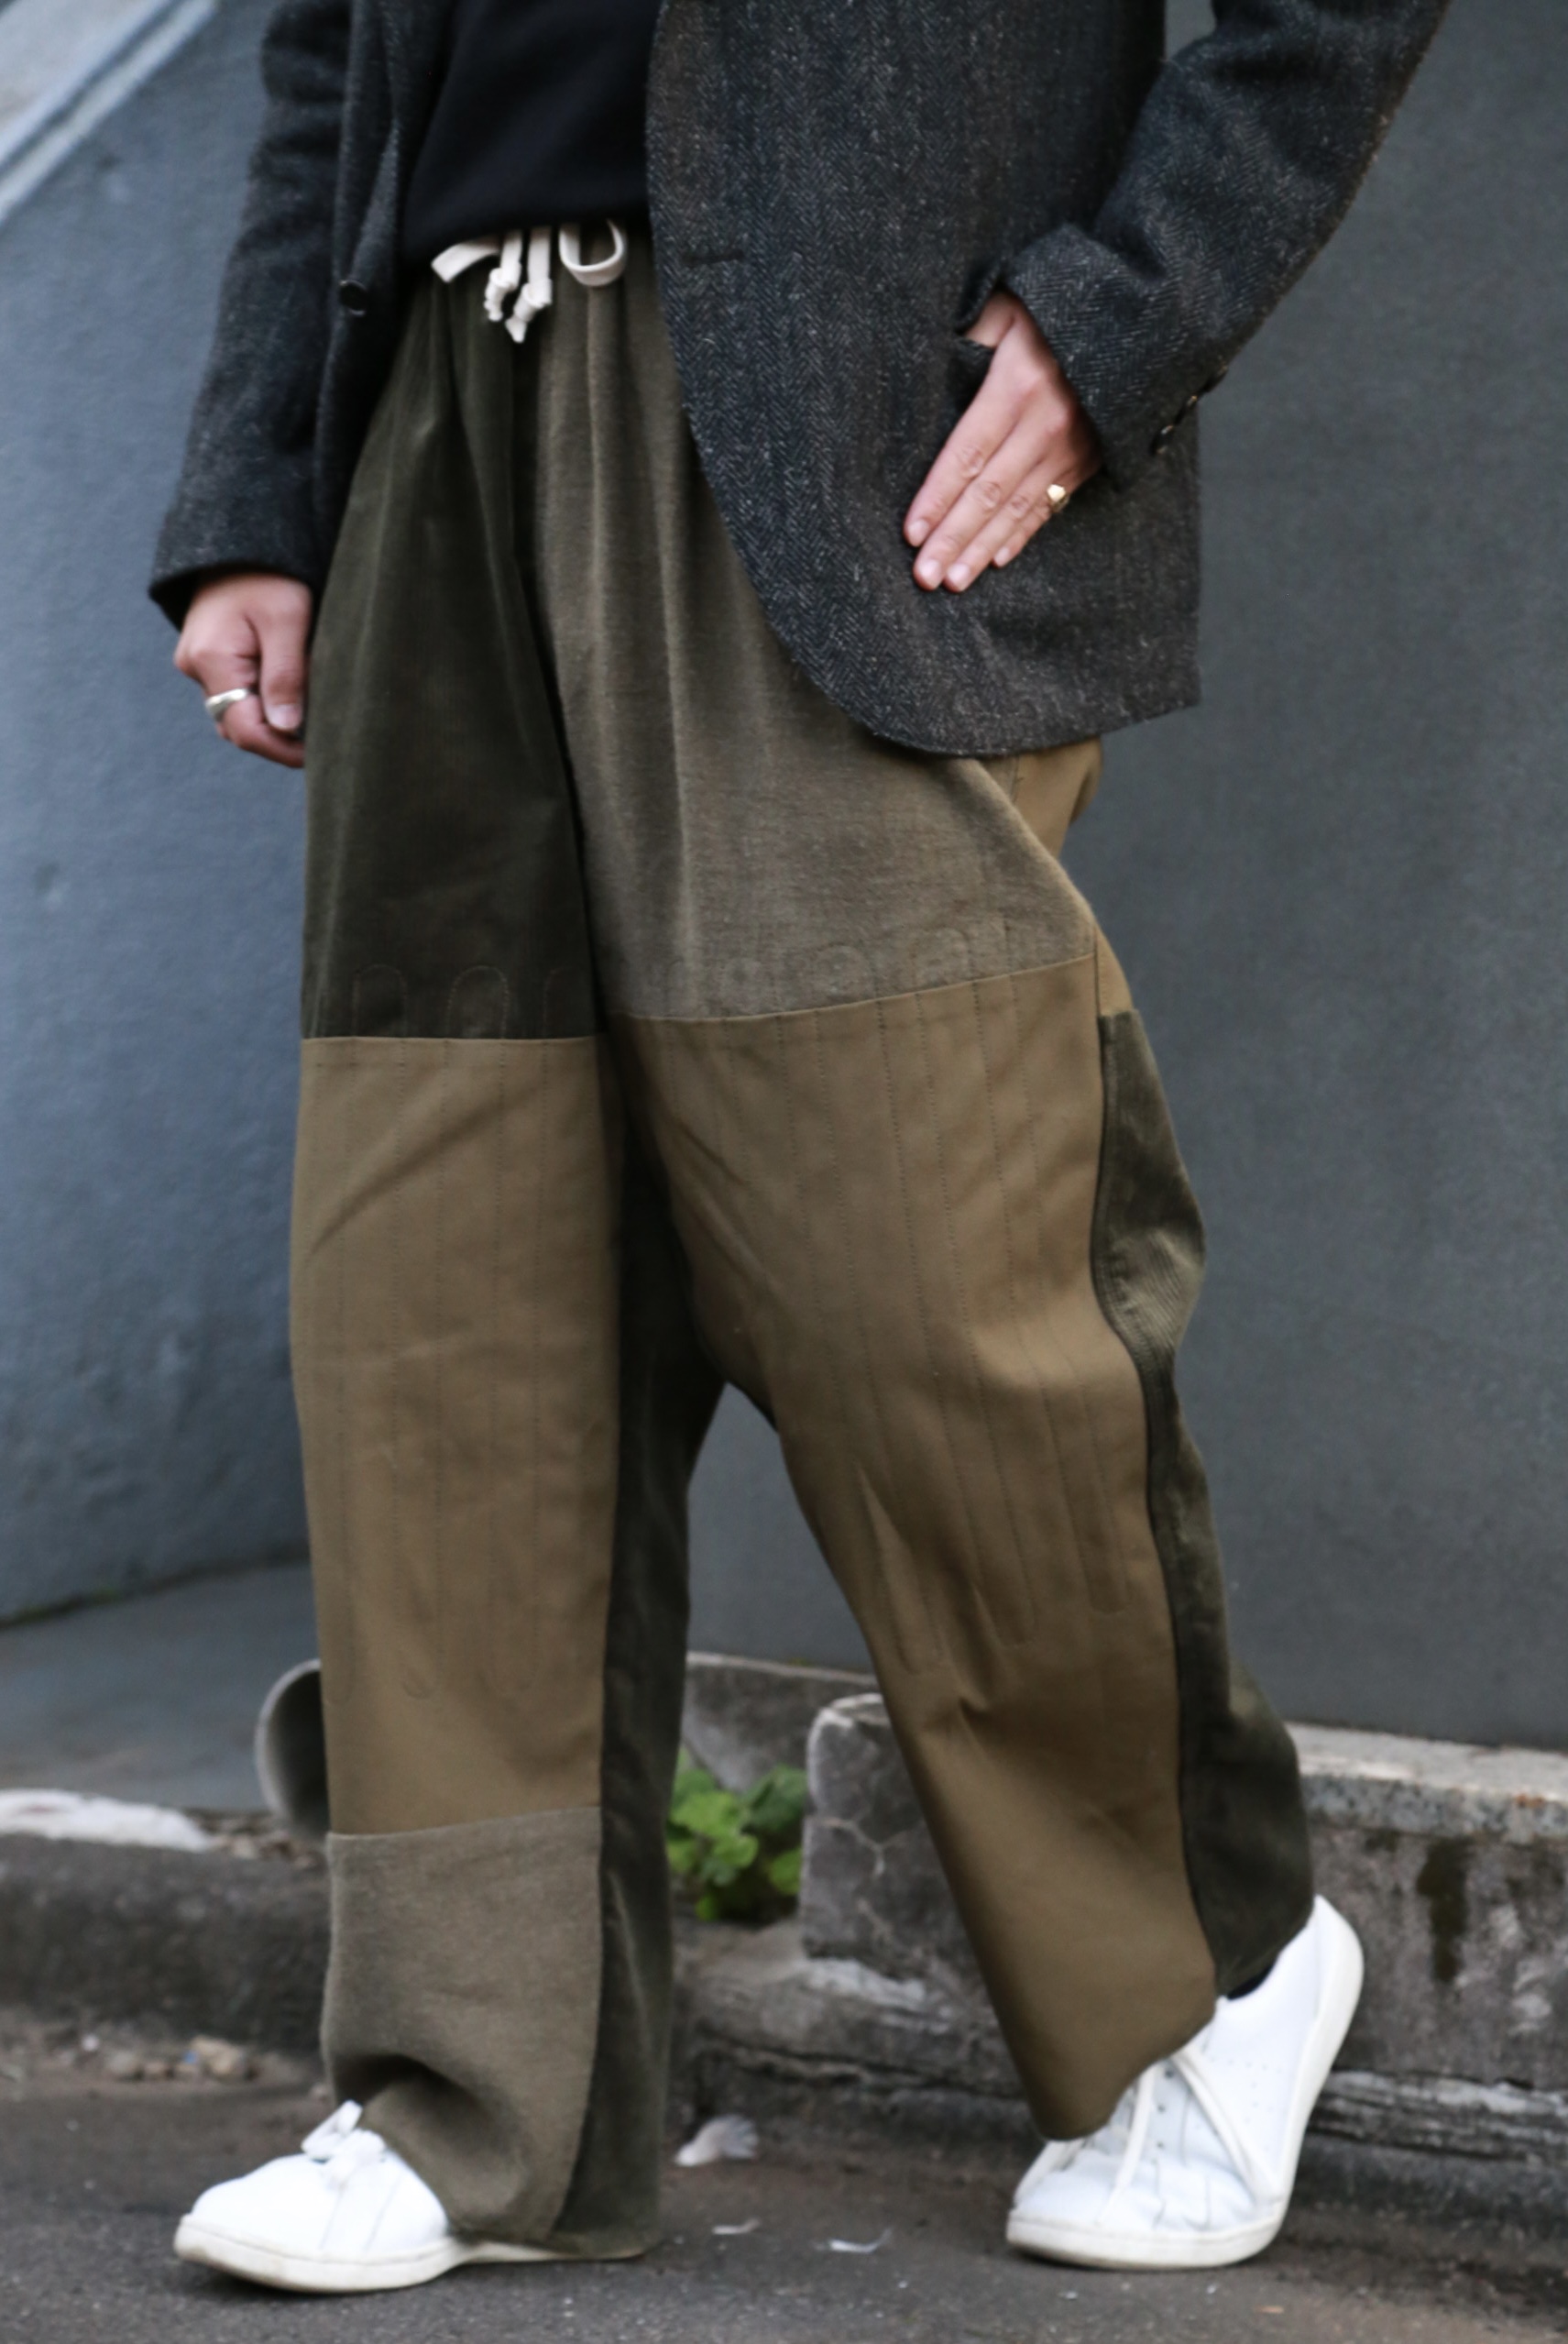 KENNETH FIELD 22AW / EZ TROUSER PANEL | ARCH TOKYO